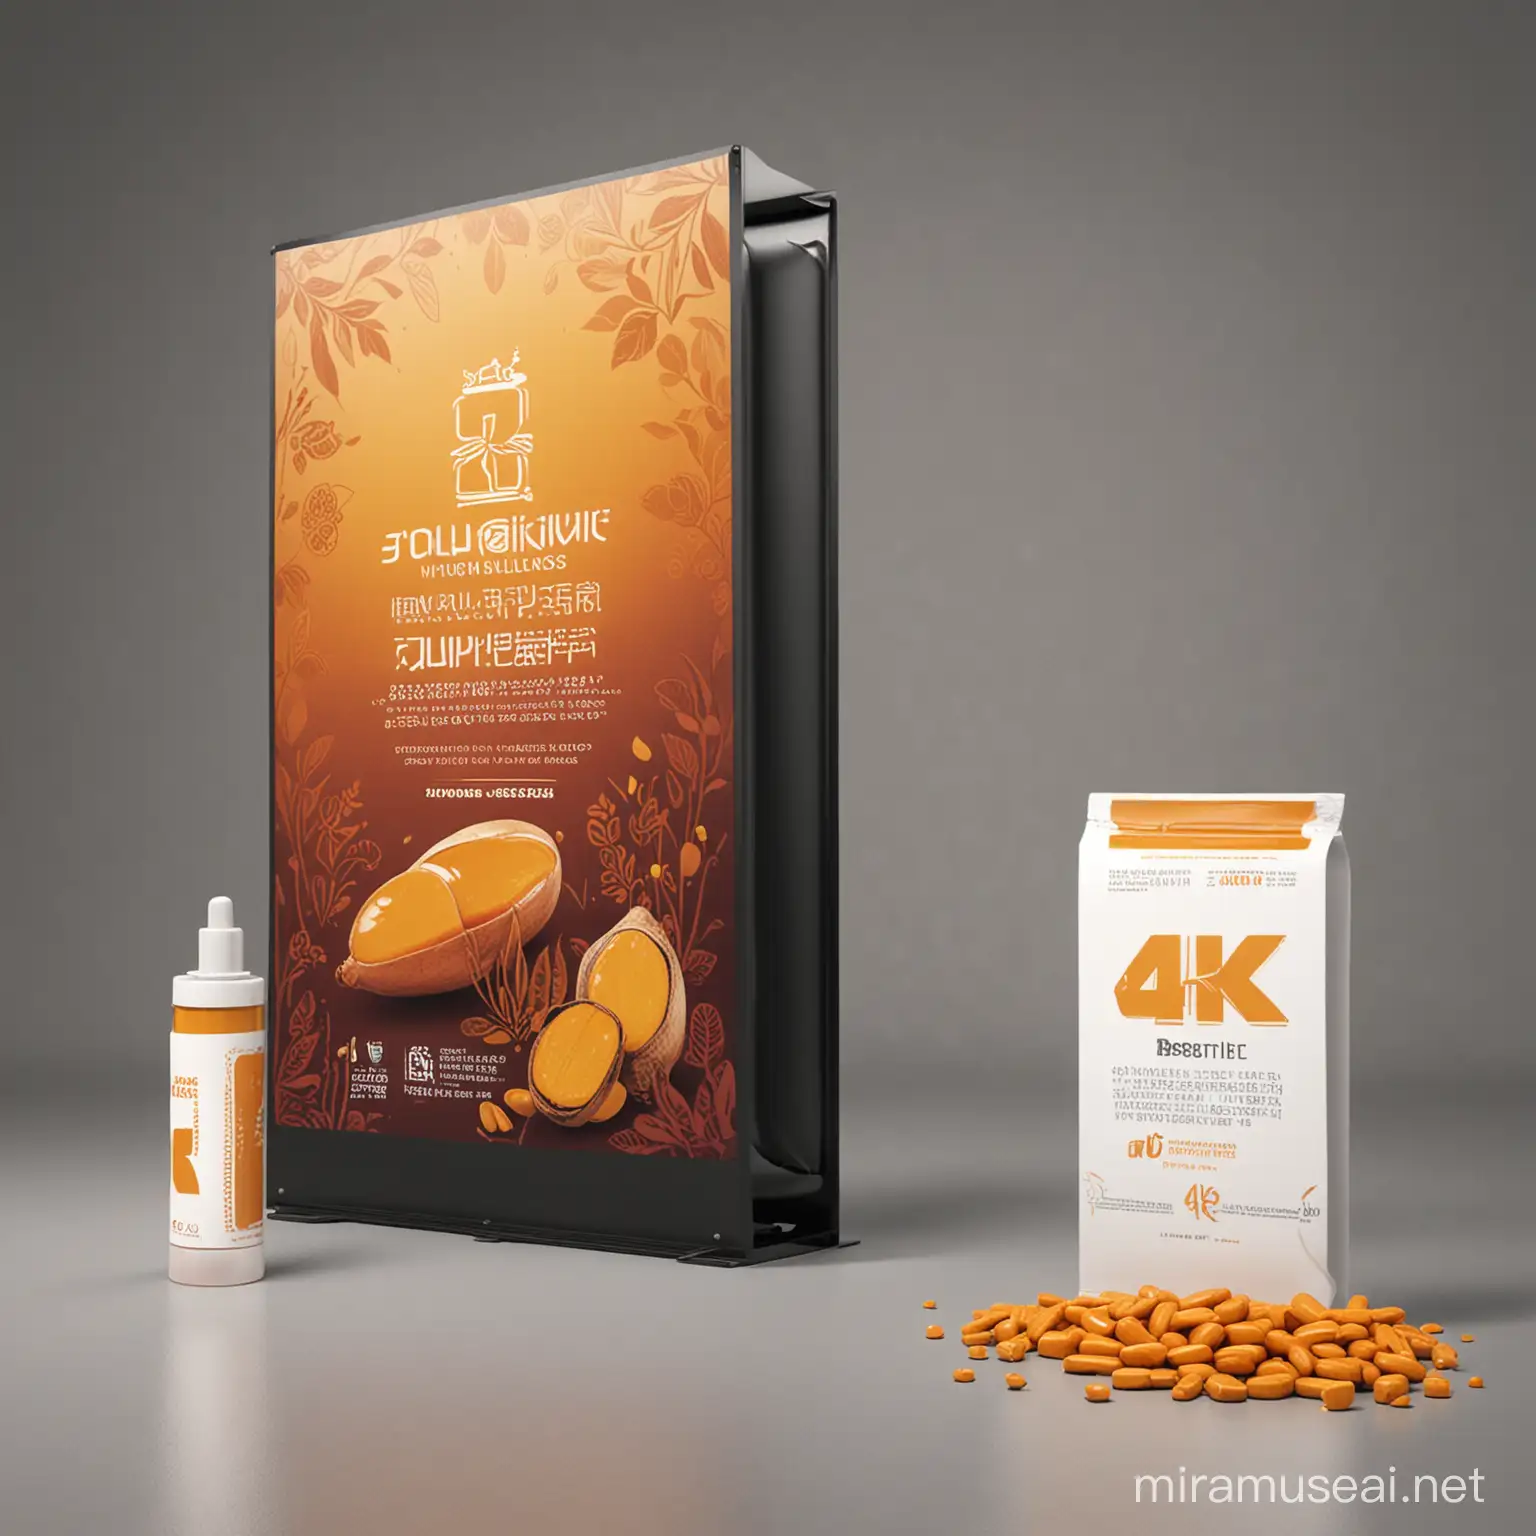 generate ulustratethe 4k hight quality 1024 x1024 pixler trademark Radiant Turmeric Wellness the capsule presentation to the display and  tradeshow with poster health care benefit